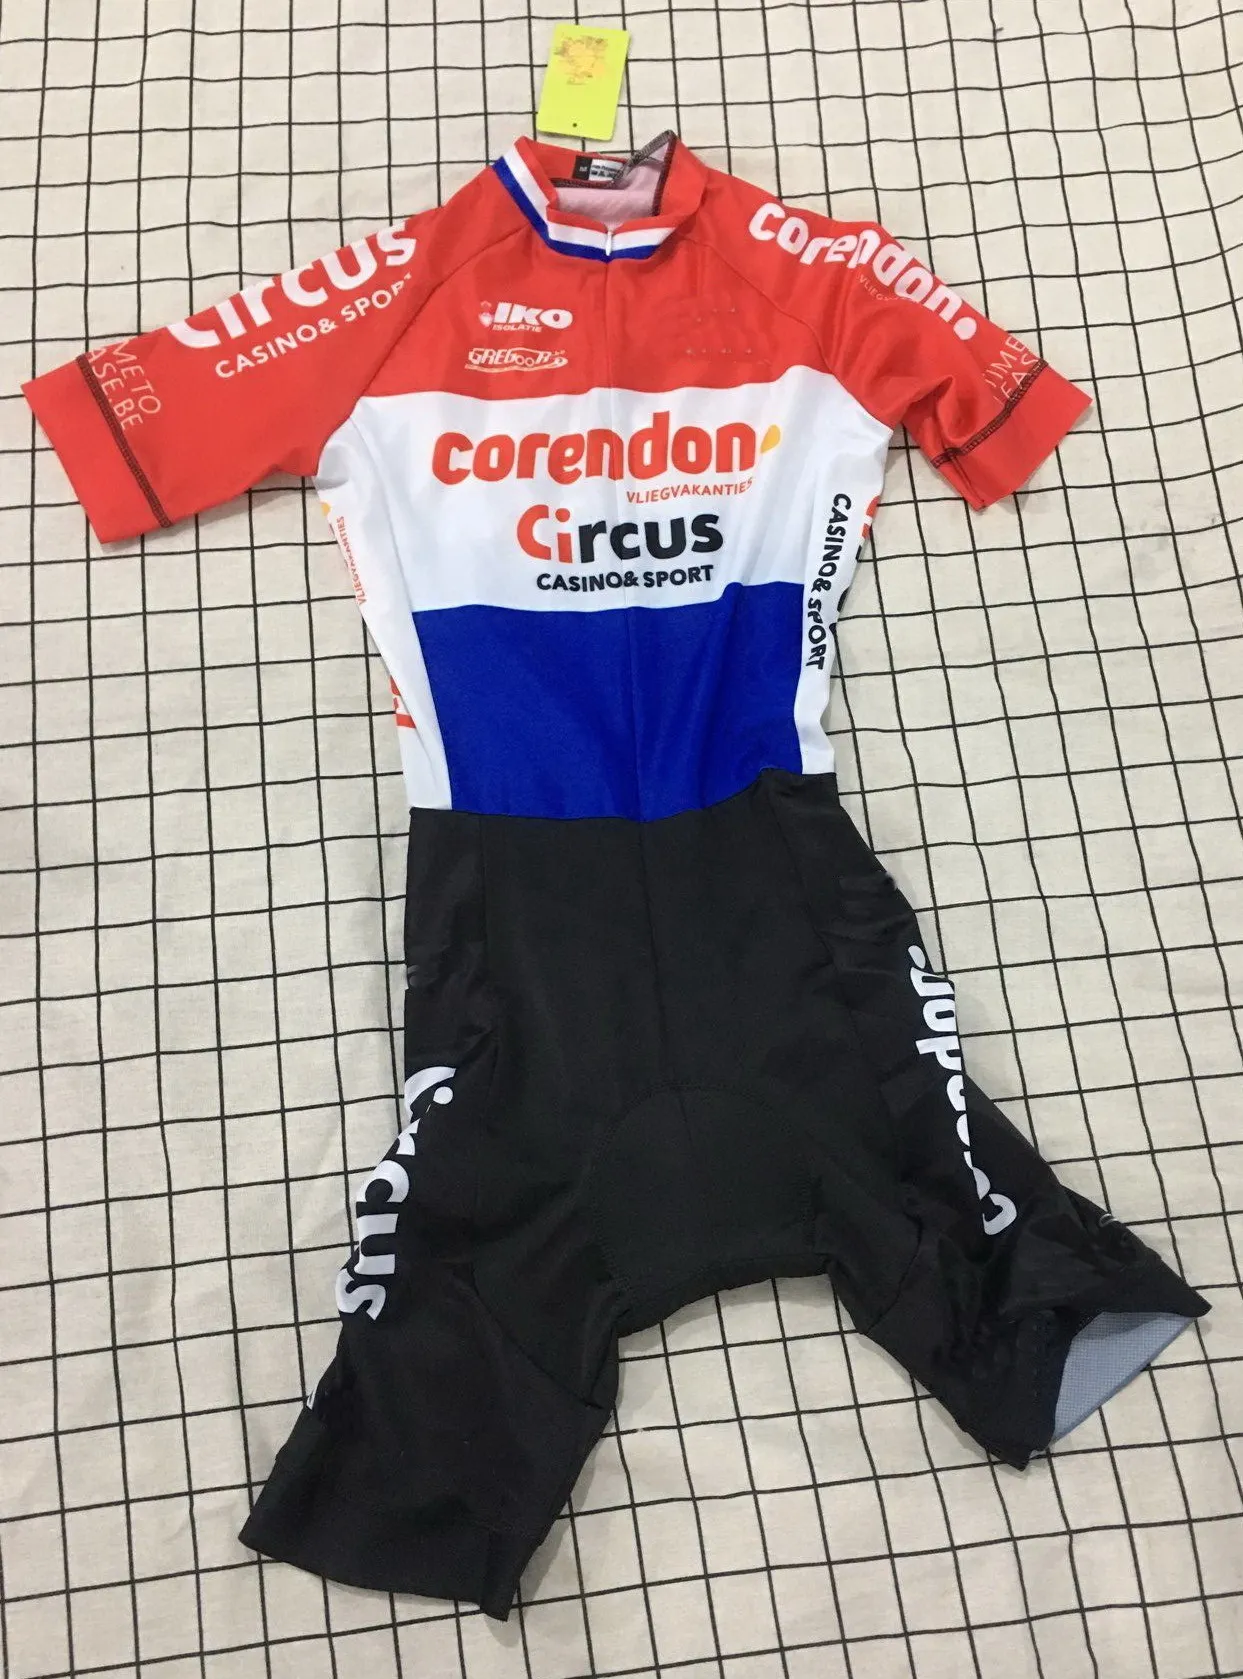 

LASER CUT Skinsuit 2019 ICORENDON-CIRCUS TEAM NL Bodysuit SHORT Cycling Jersey Bike Bicycle Clothing Maillot Ropa Ciclismo